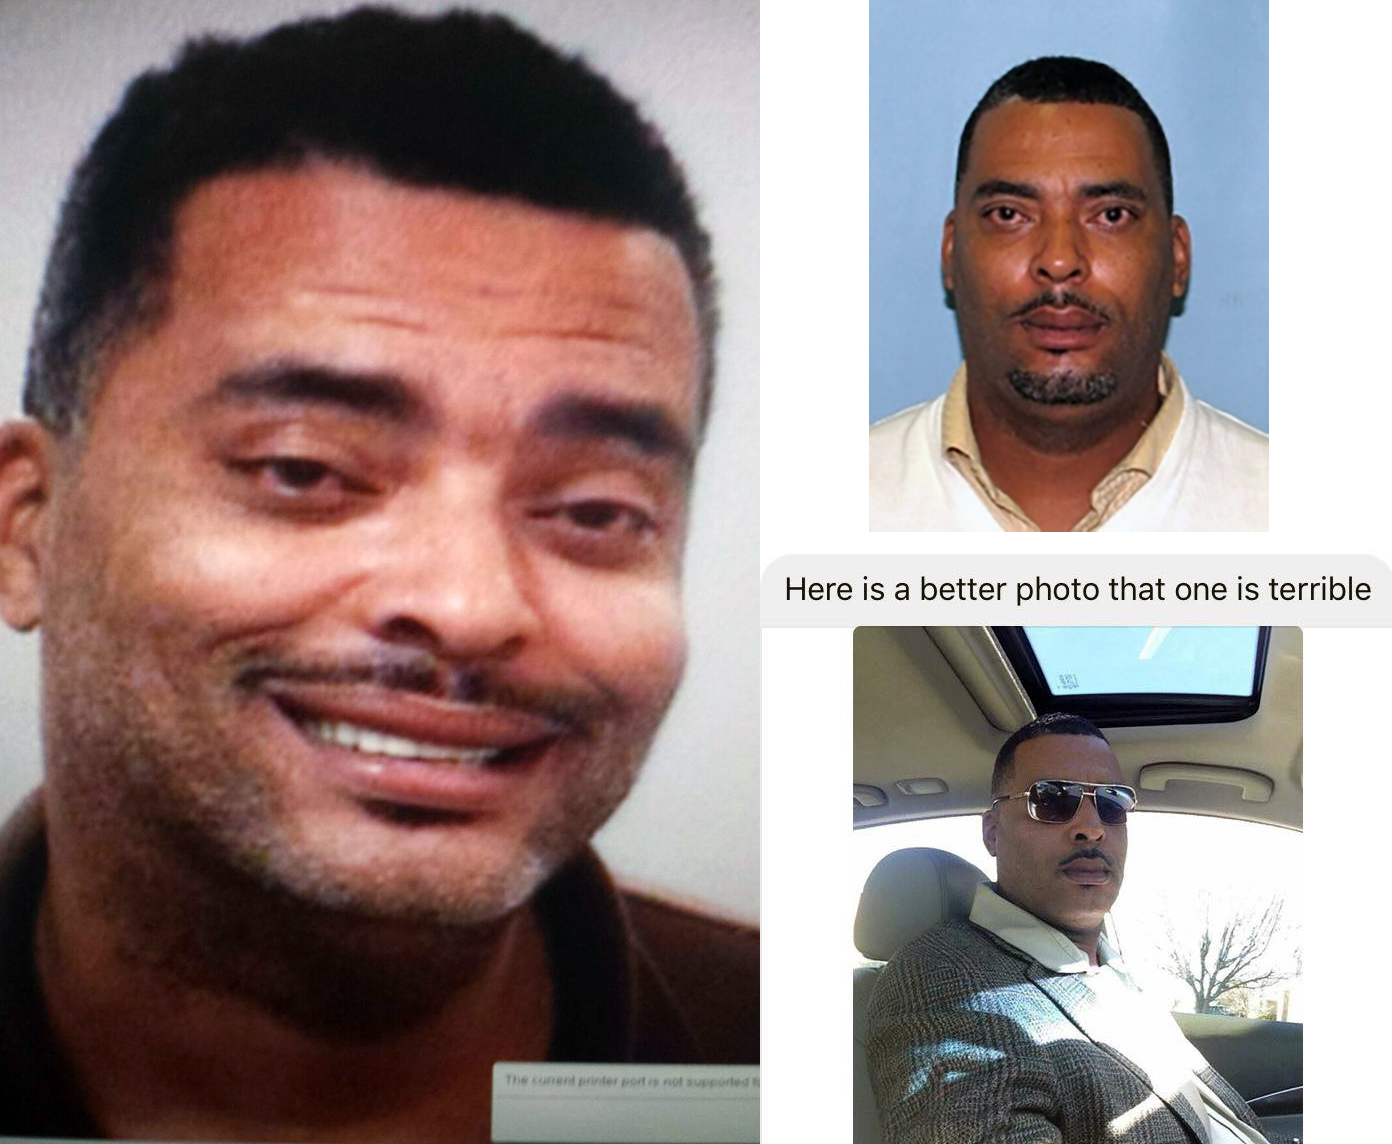 This combination of images released by the Lima Police Department of Lima, Ohio, on its Facebook page on Jan. 6, show Donald A "Chip" Pugh, a person of interest in several other cases including an arson and vandalism. The image at bottom right was provided by Pugh and posted with the following caption: "This photo was sent to us by Mr. Pugh himself. We thank him for being helpful, but now we would appreciate it if he would come speak to us at the LPD about his charges."